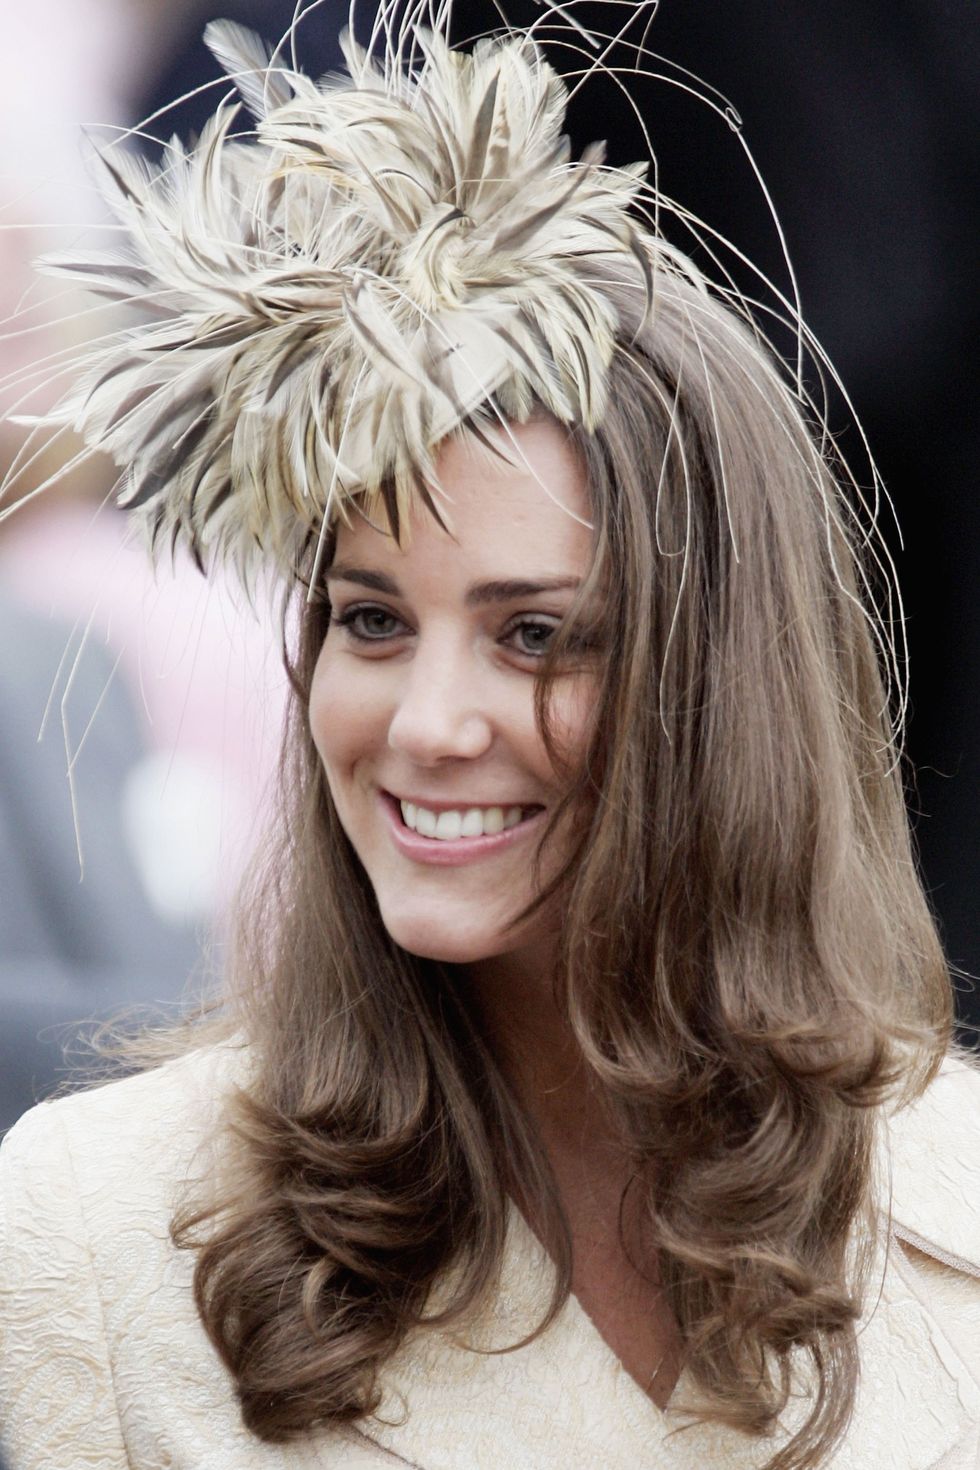 kate middleton at wedding of laura parker bowles